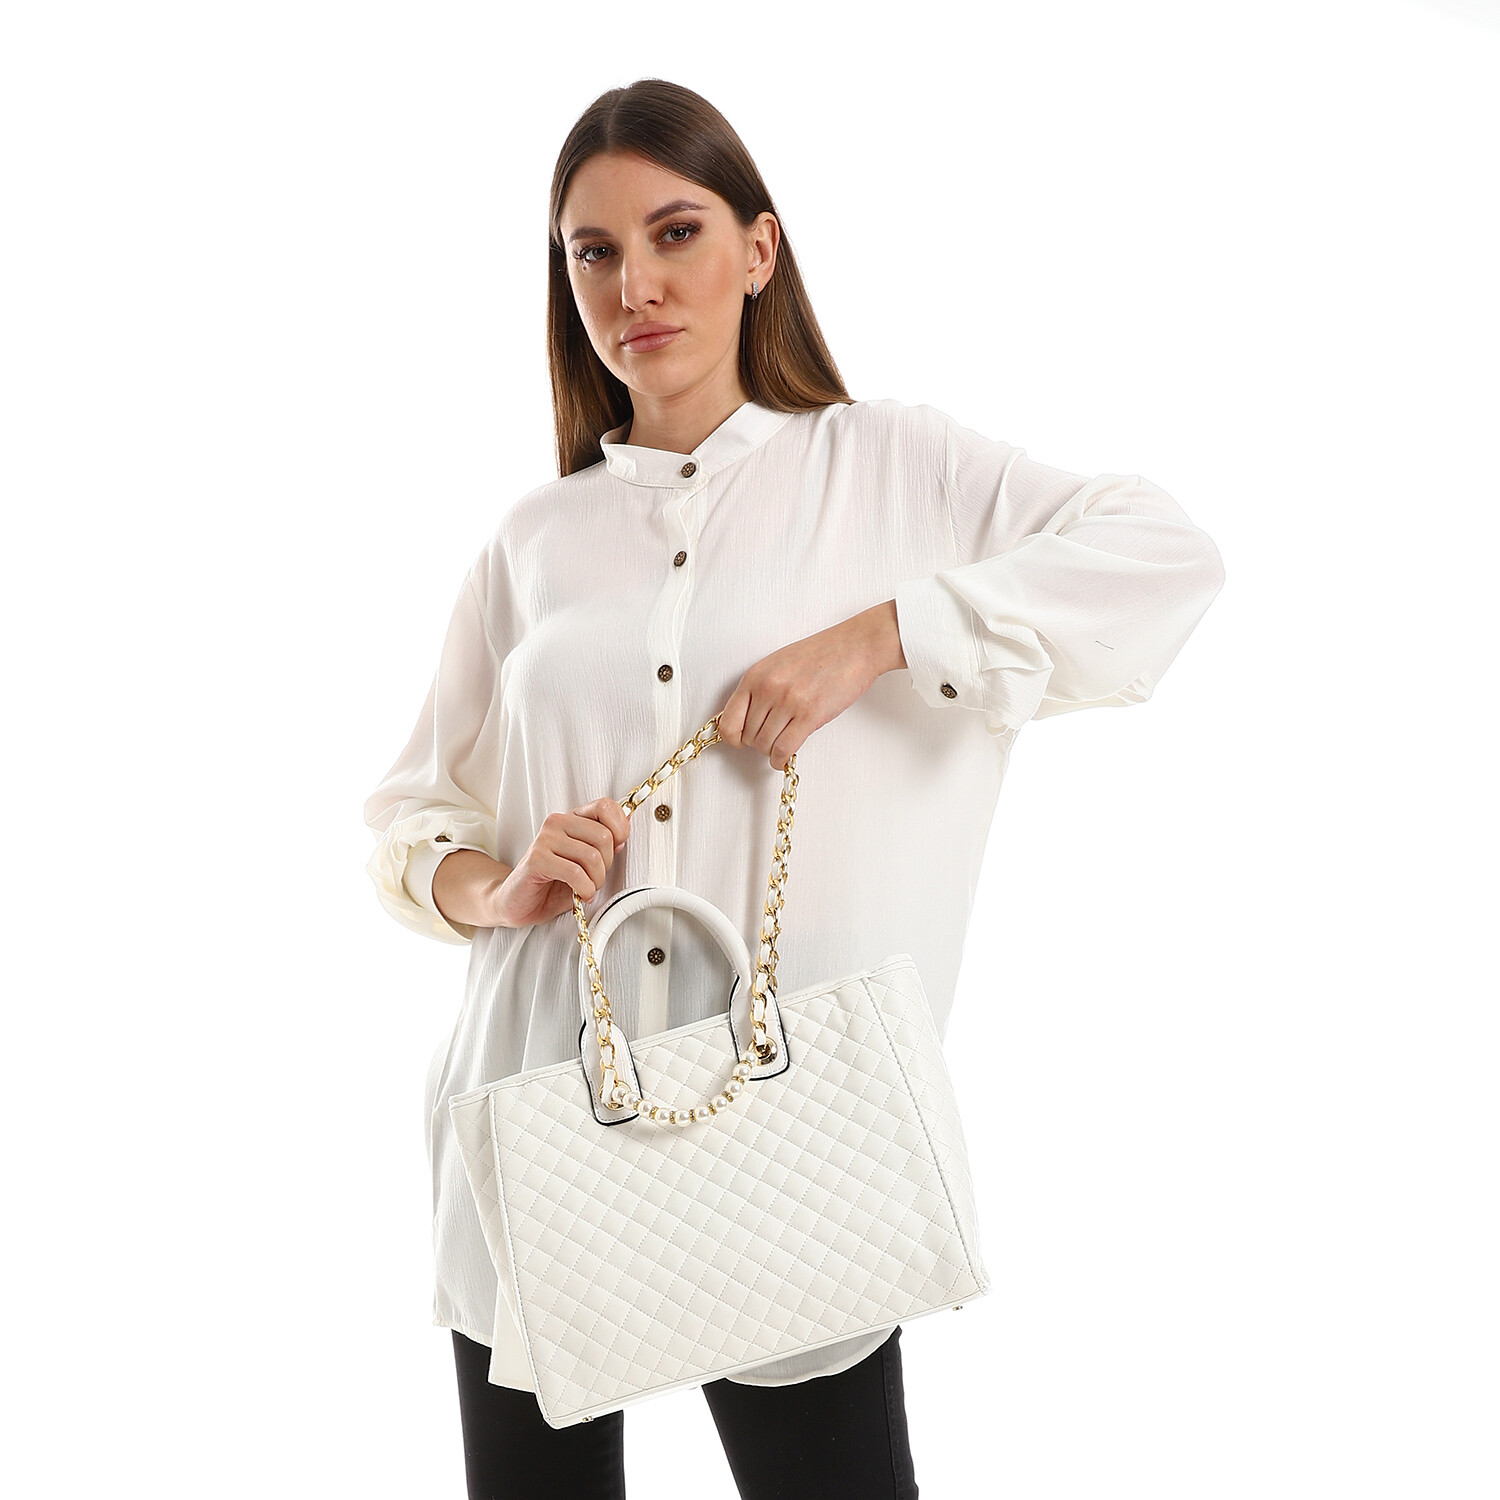 Lattice Patterned Double Handbag with Decorated Pearls - White - 4975